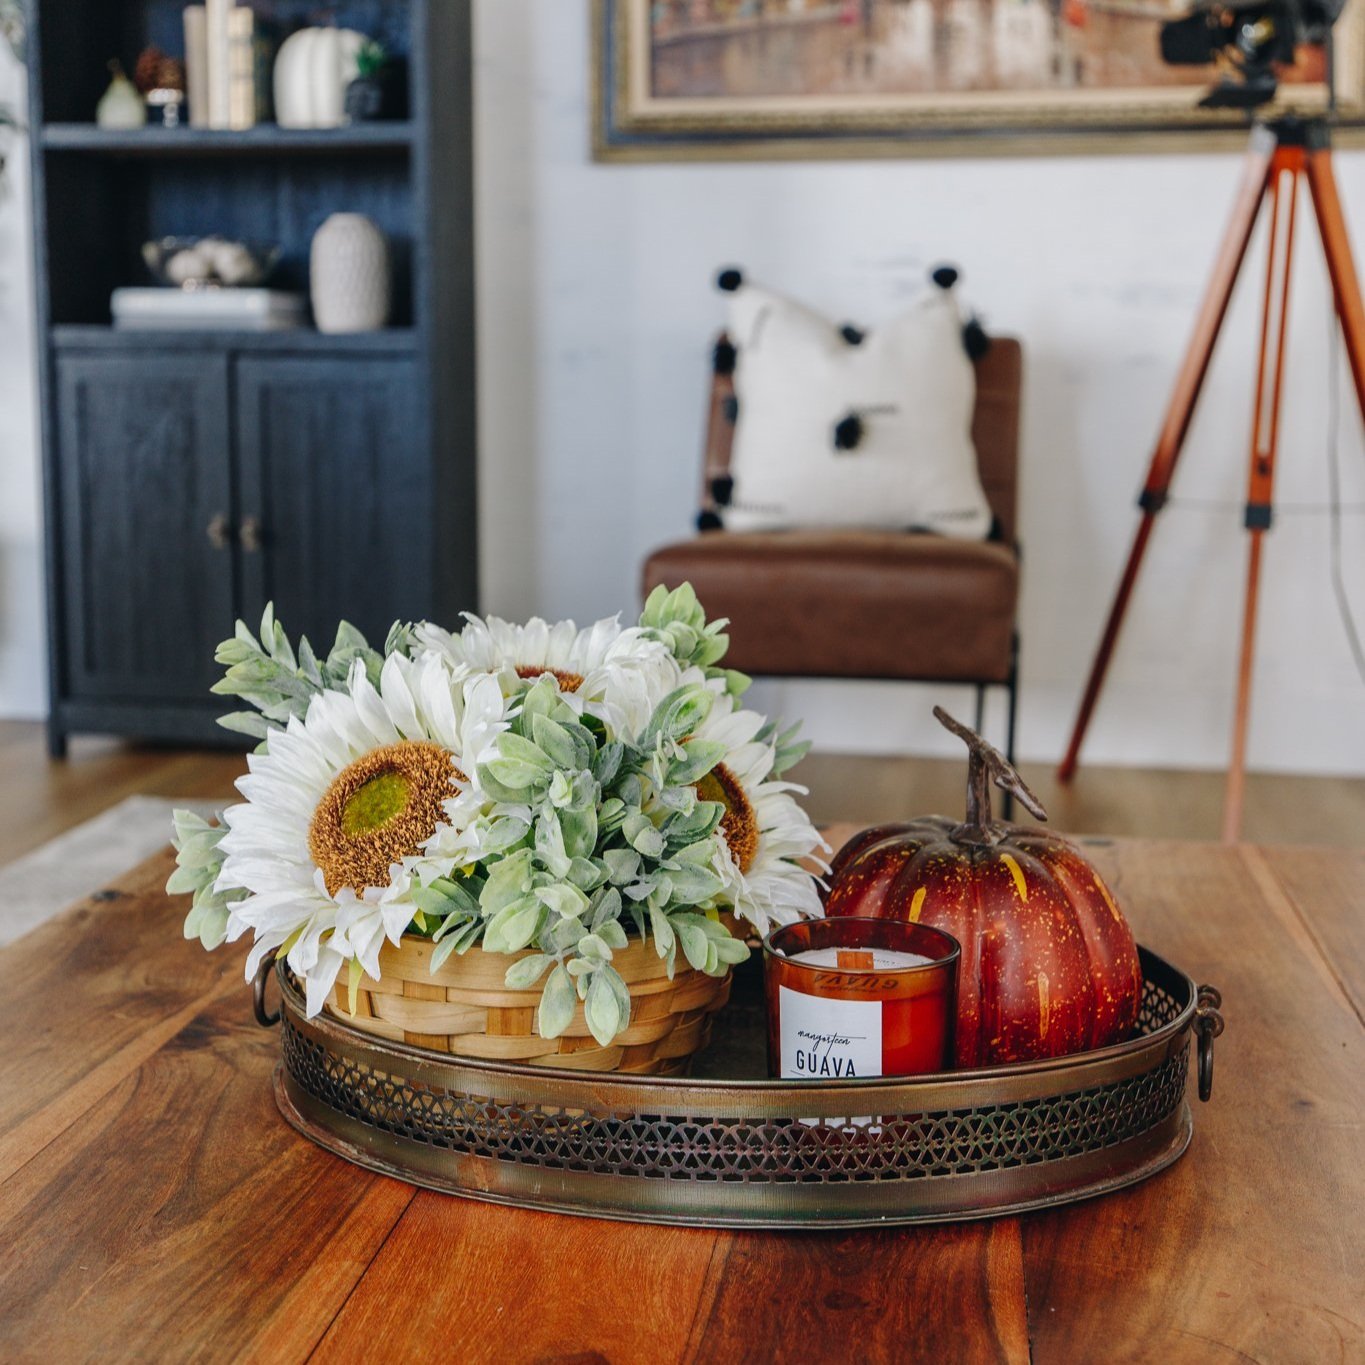 add faux plants to your home this fall to save money and time without hassle